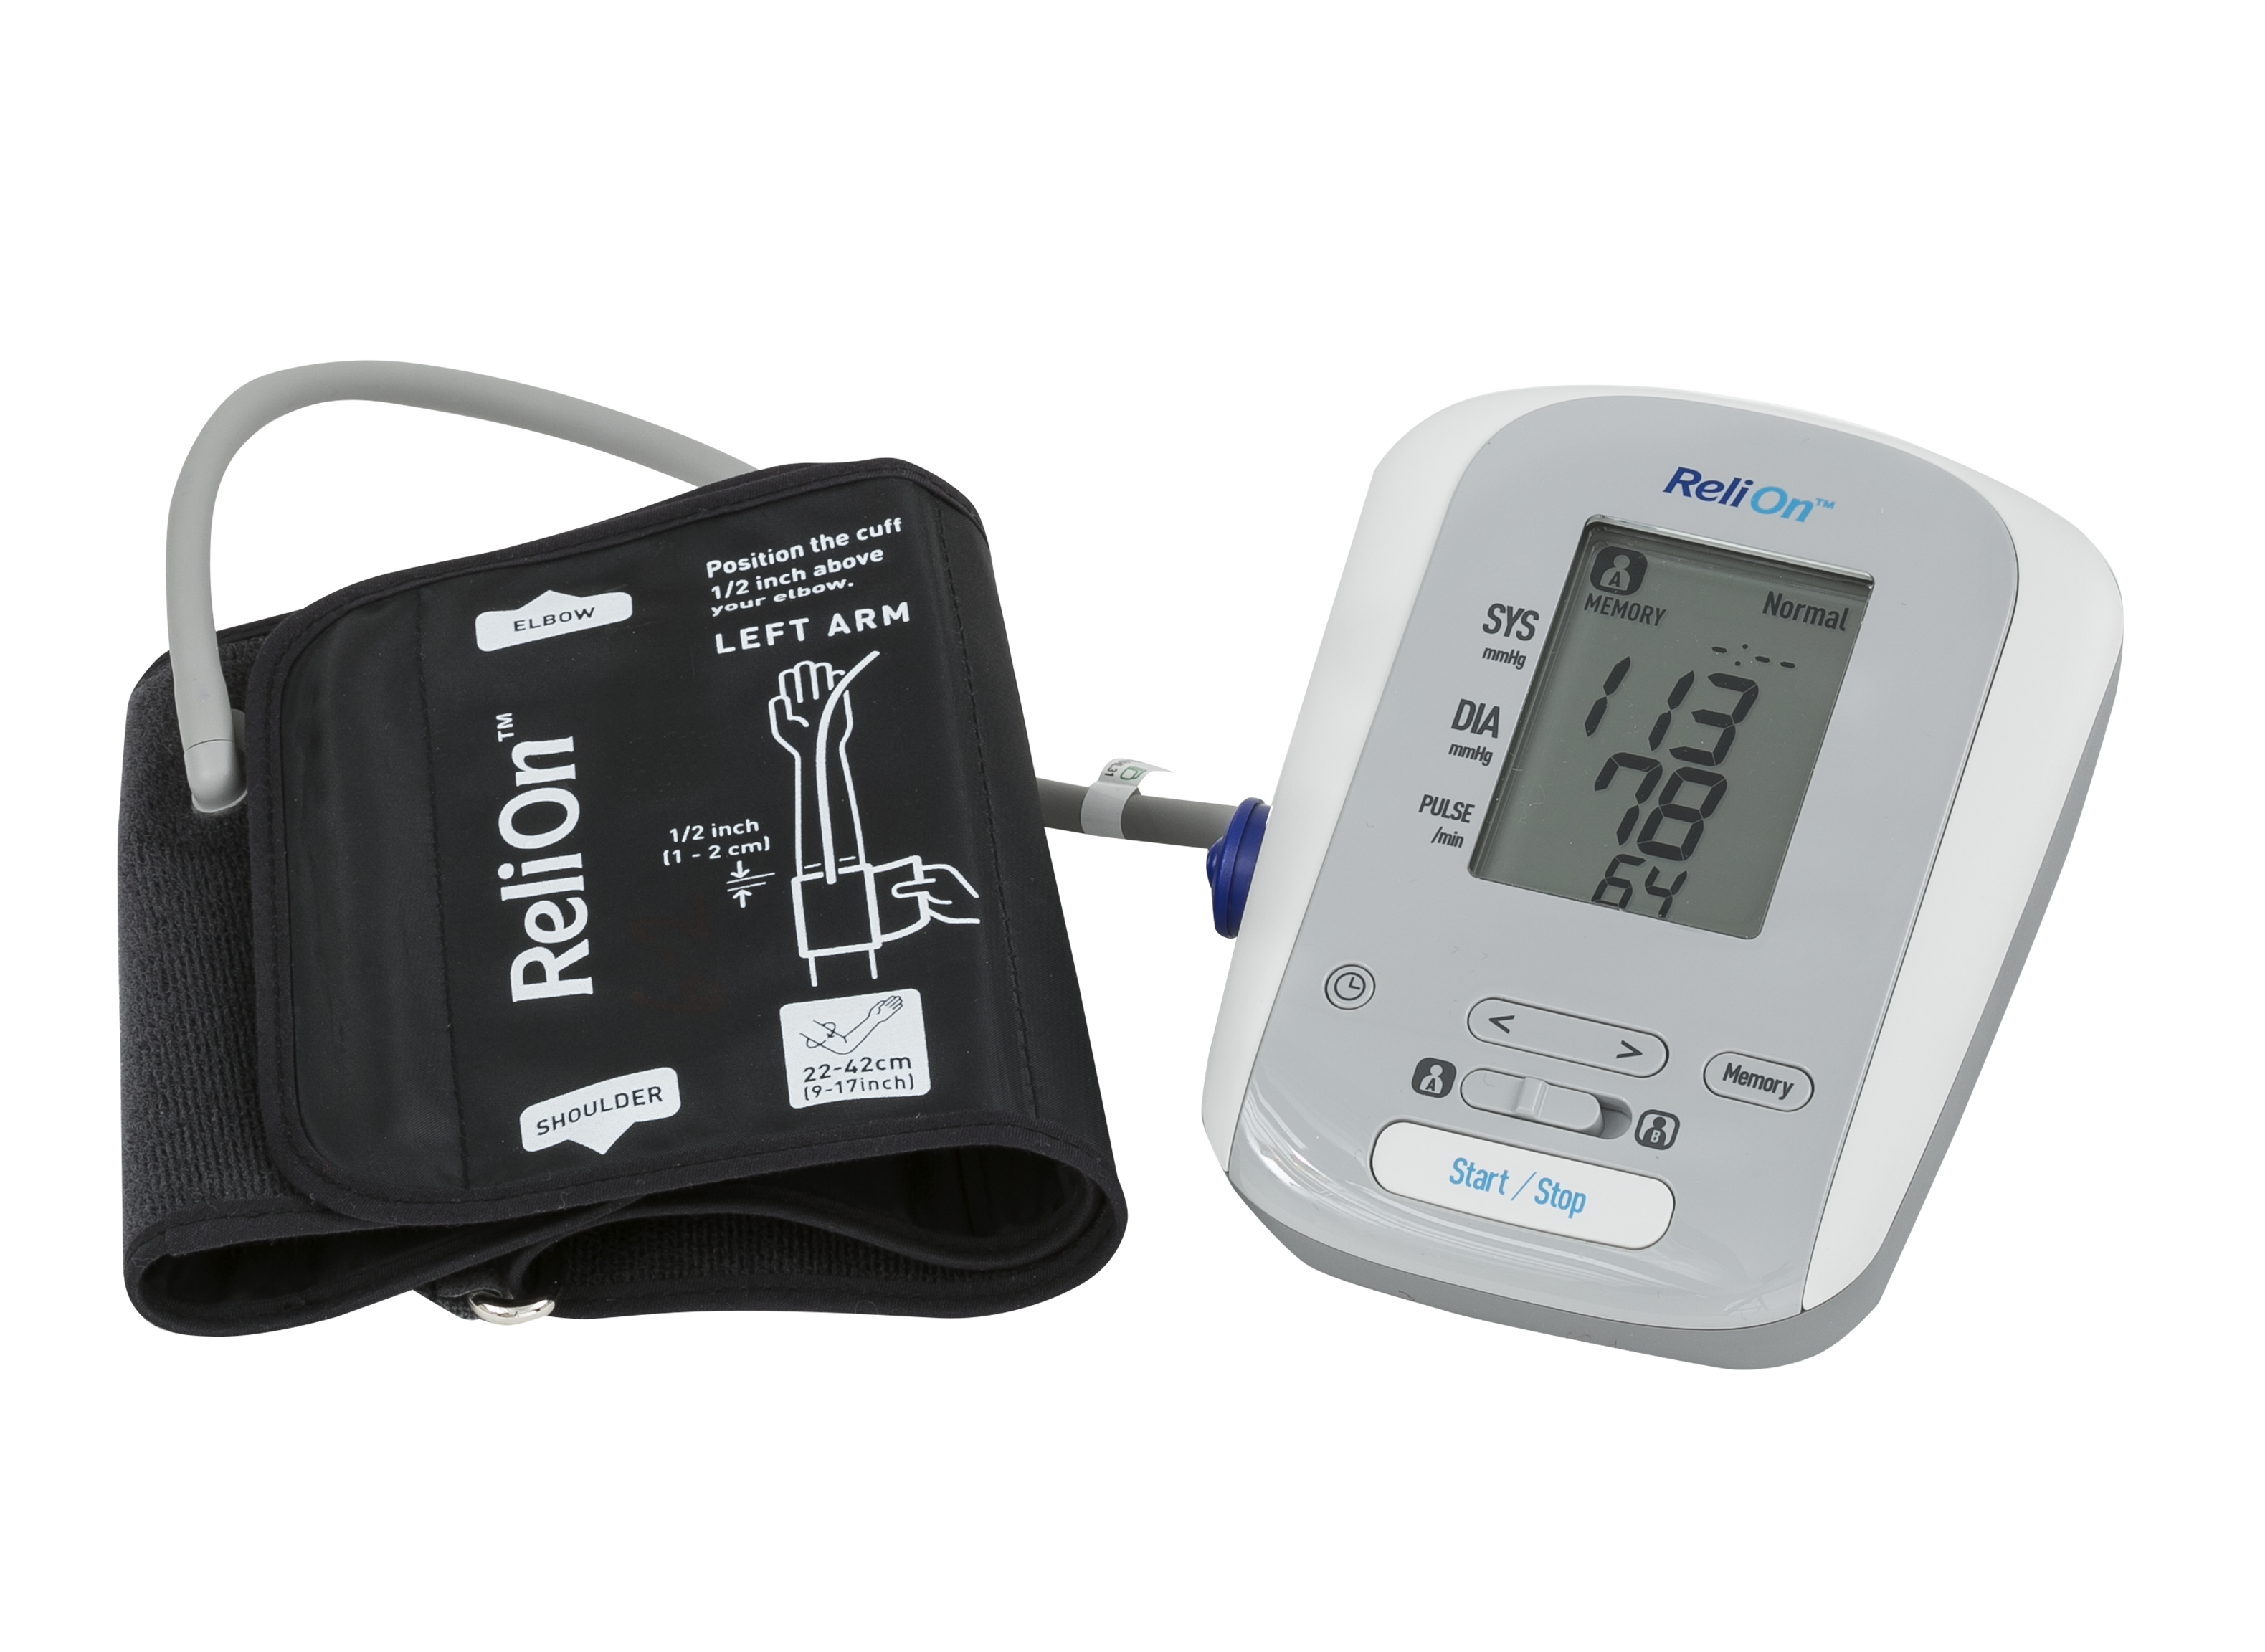 Omron reli on blood pressure monitor 7100REL with 2 cuffs (One large)